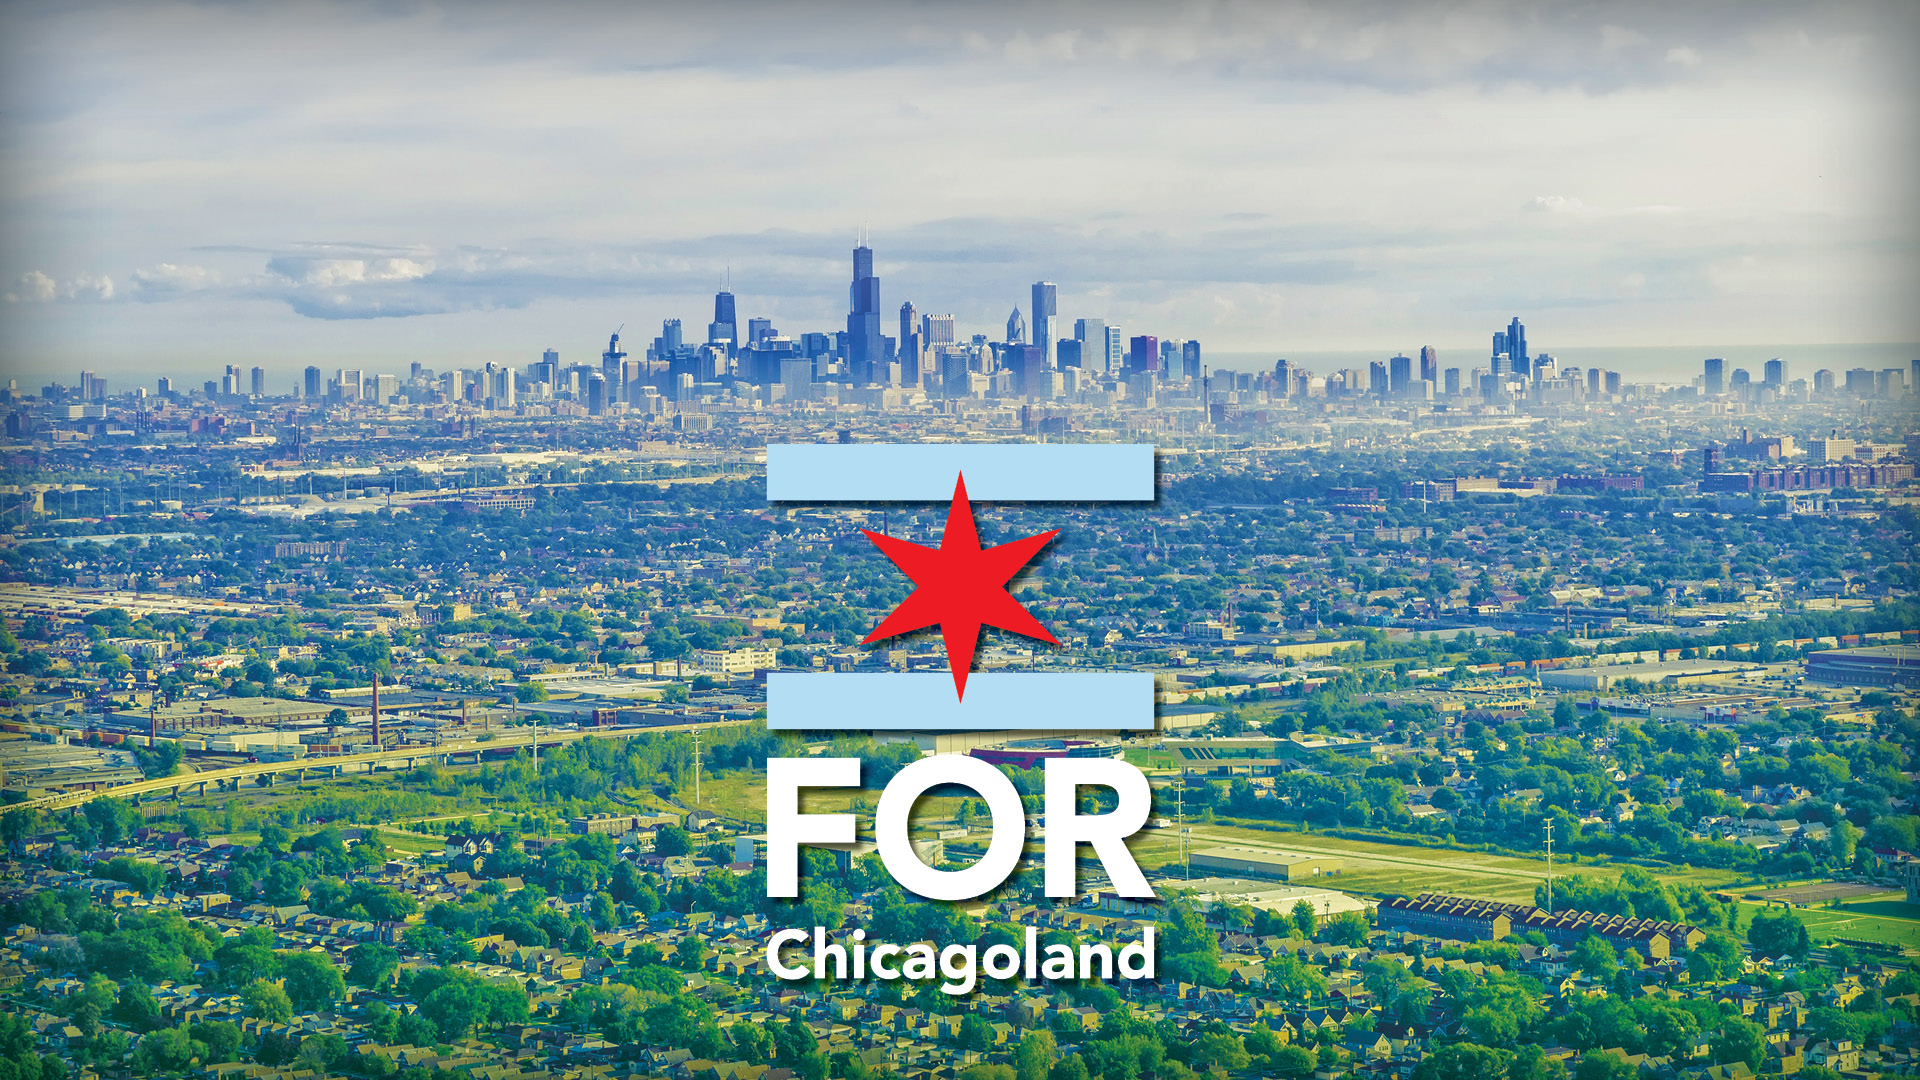 FOR Chicagoland | First Saturday Serve
Saturday, June 1
Butterfield | Chicago
